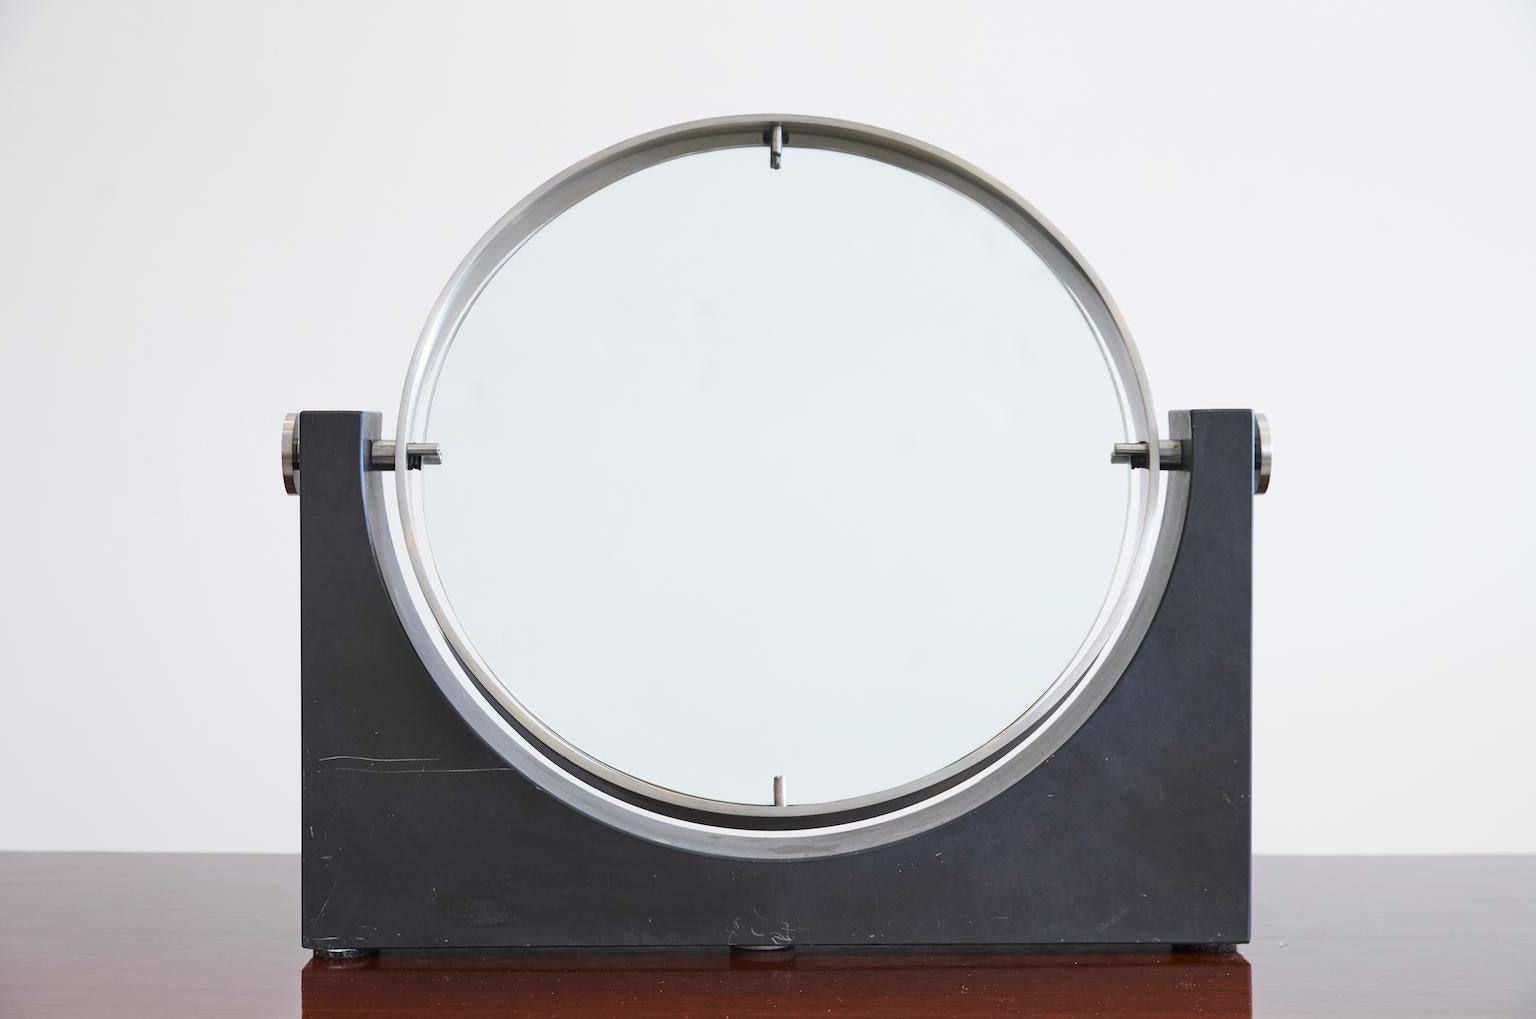 Beautiful marble and stainless steel table top vanity mirror by Angelo Mangiarotti.
Mirror pivots and is beautifully made. 
For your consideration a vintage modern table mirror in black marble and stainless steel. Made in Italy, circa 1970s. 
Mirror